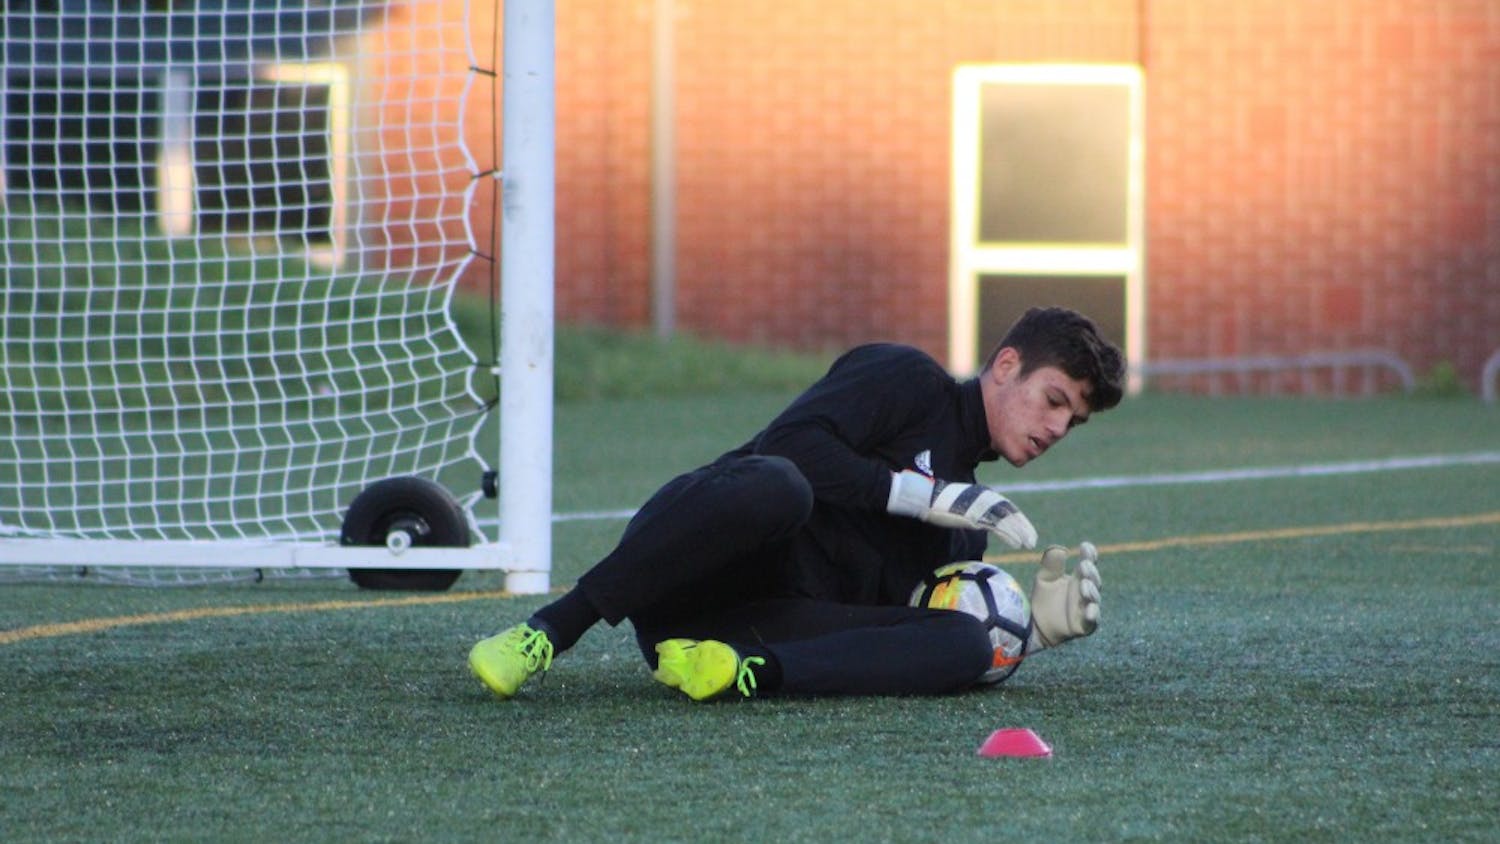 Freshman goalkeeper Trey Muse saves a shot during warm-ups before IU’s match against the Butler Bulldogs Oct. 18 in Indianapolis. Muse allowed no goals during the IU Credit Union/Adidas Classic.&nbsp;